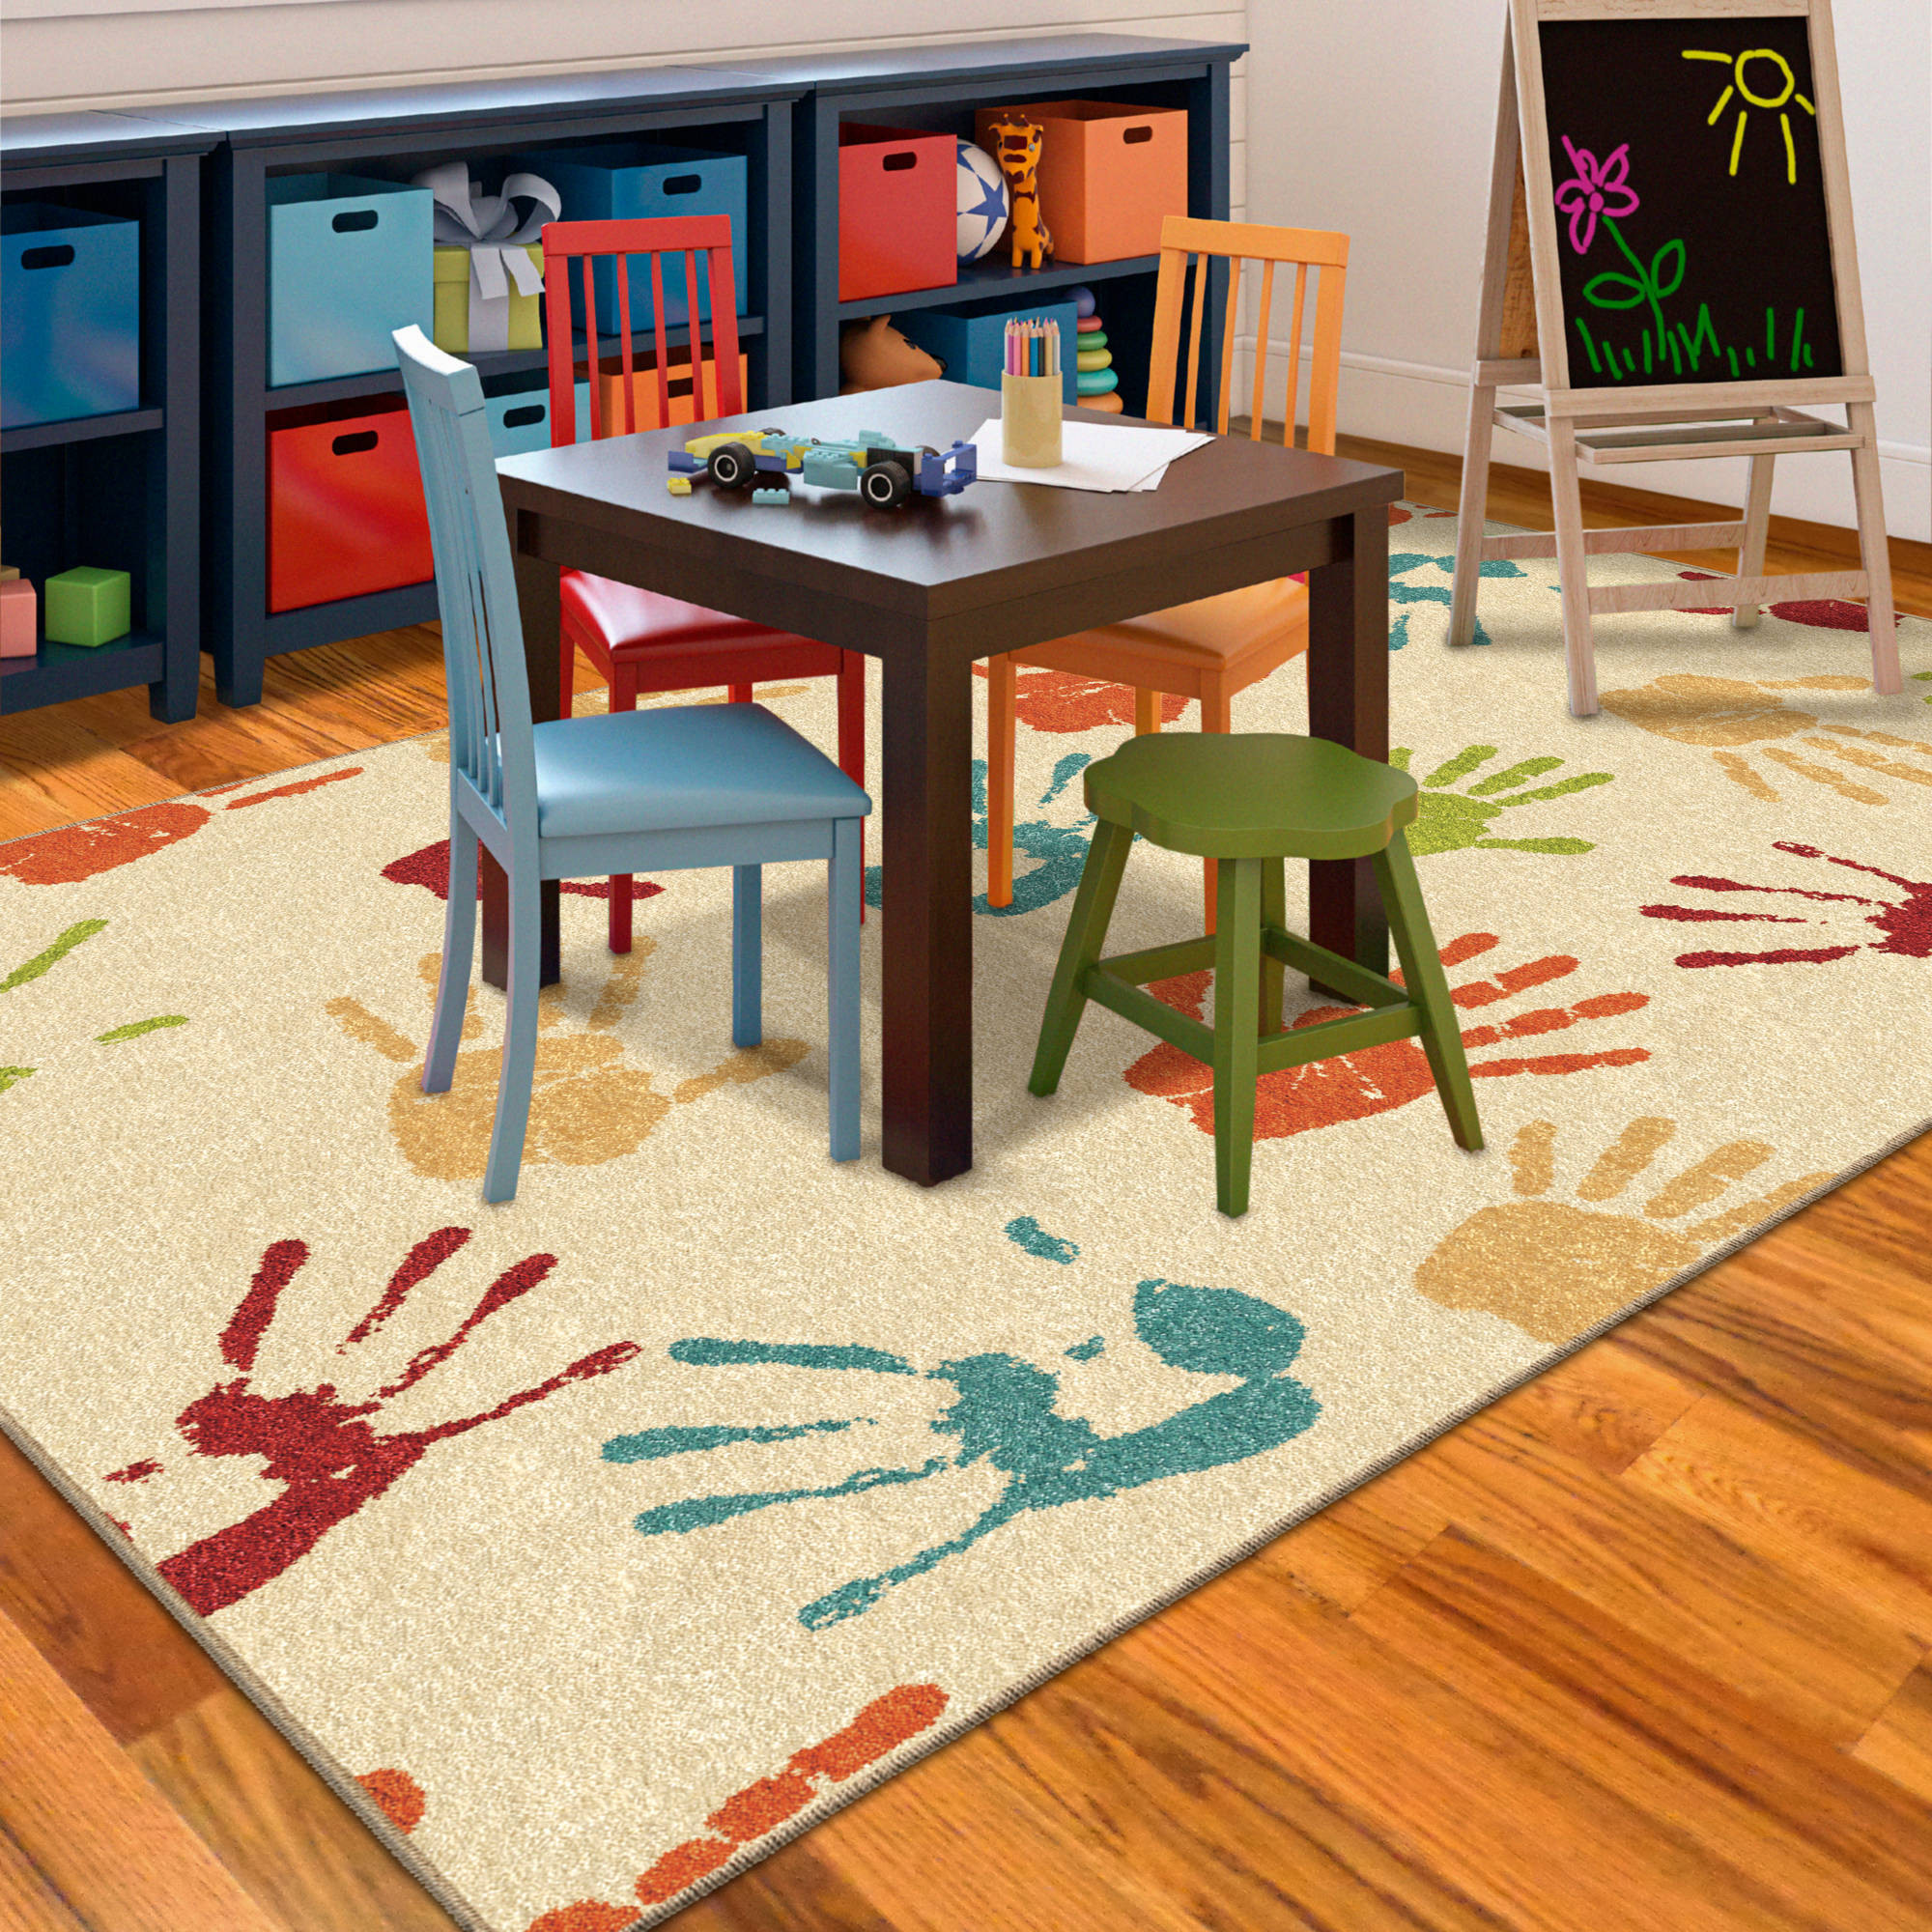 Rugs For Kids Play Room
 5 Things to Think About When Choosing Kids Playroom Rugs